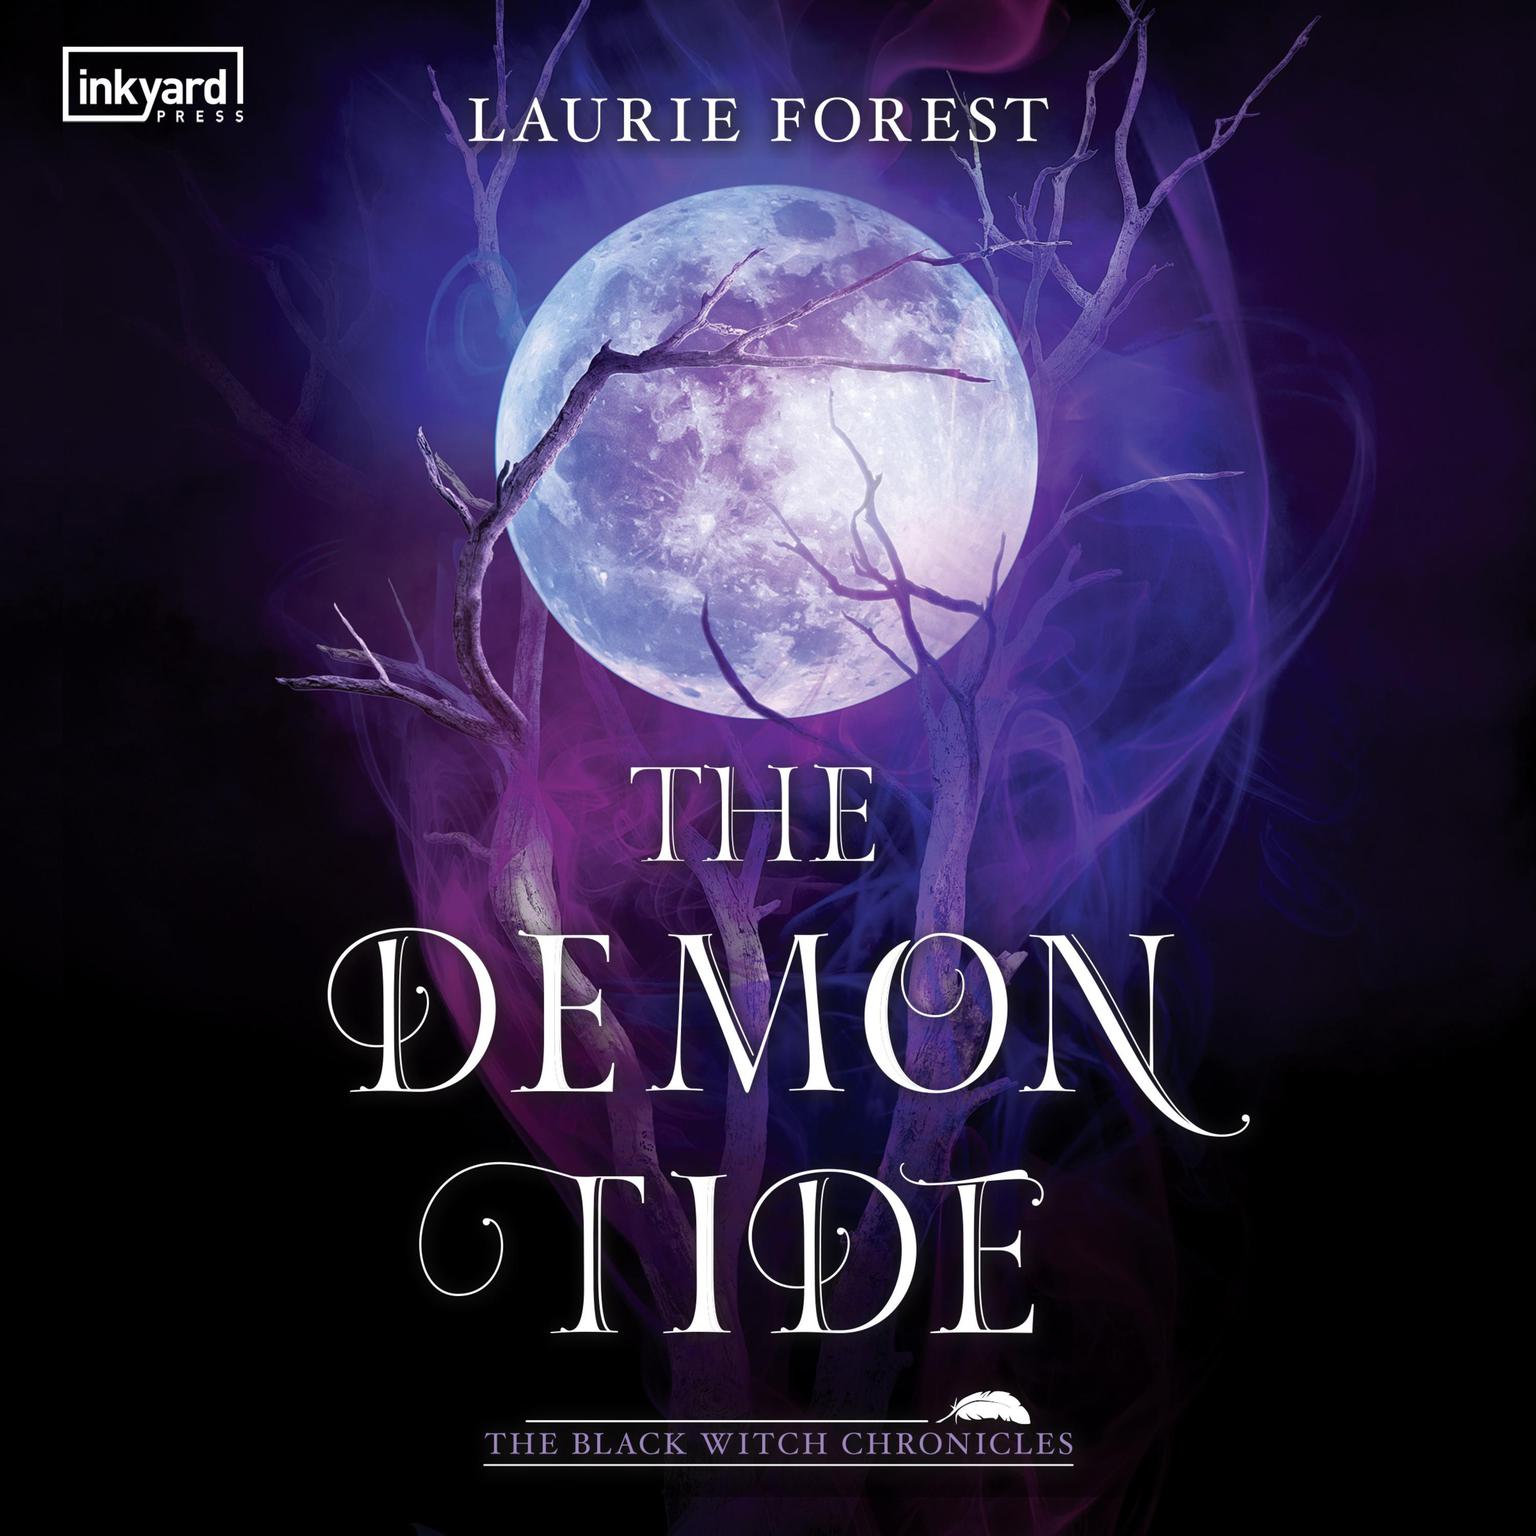 the demon tide by laurie forest